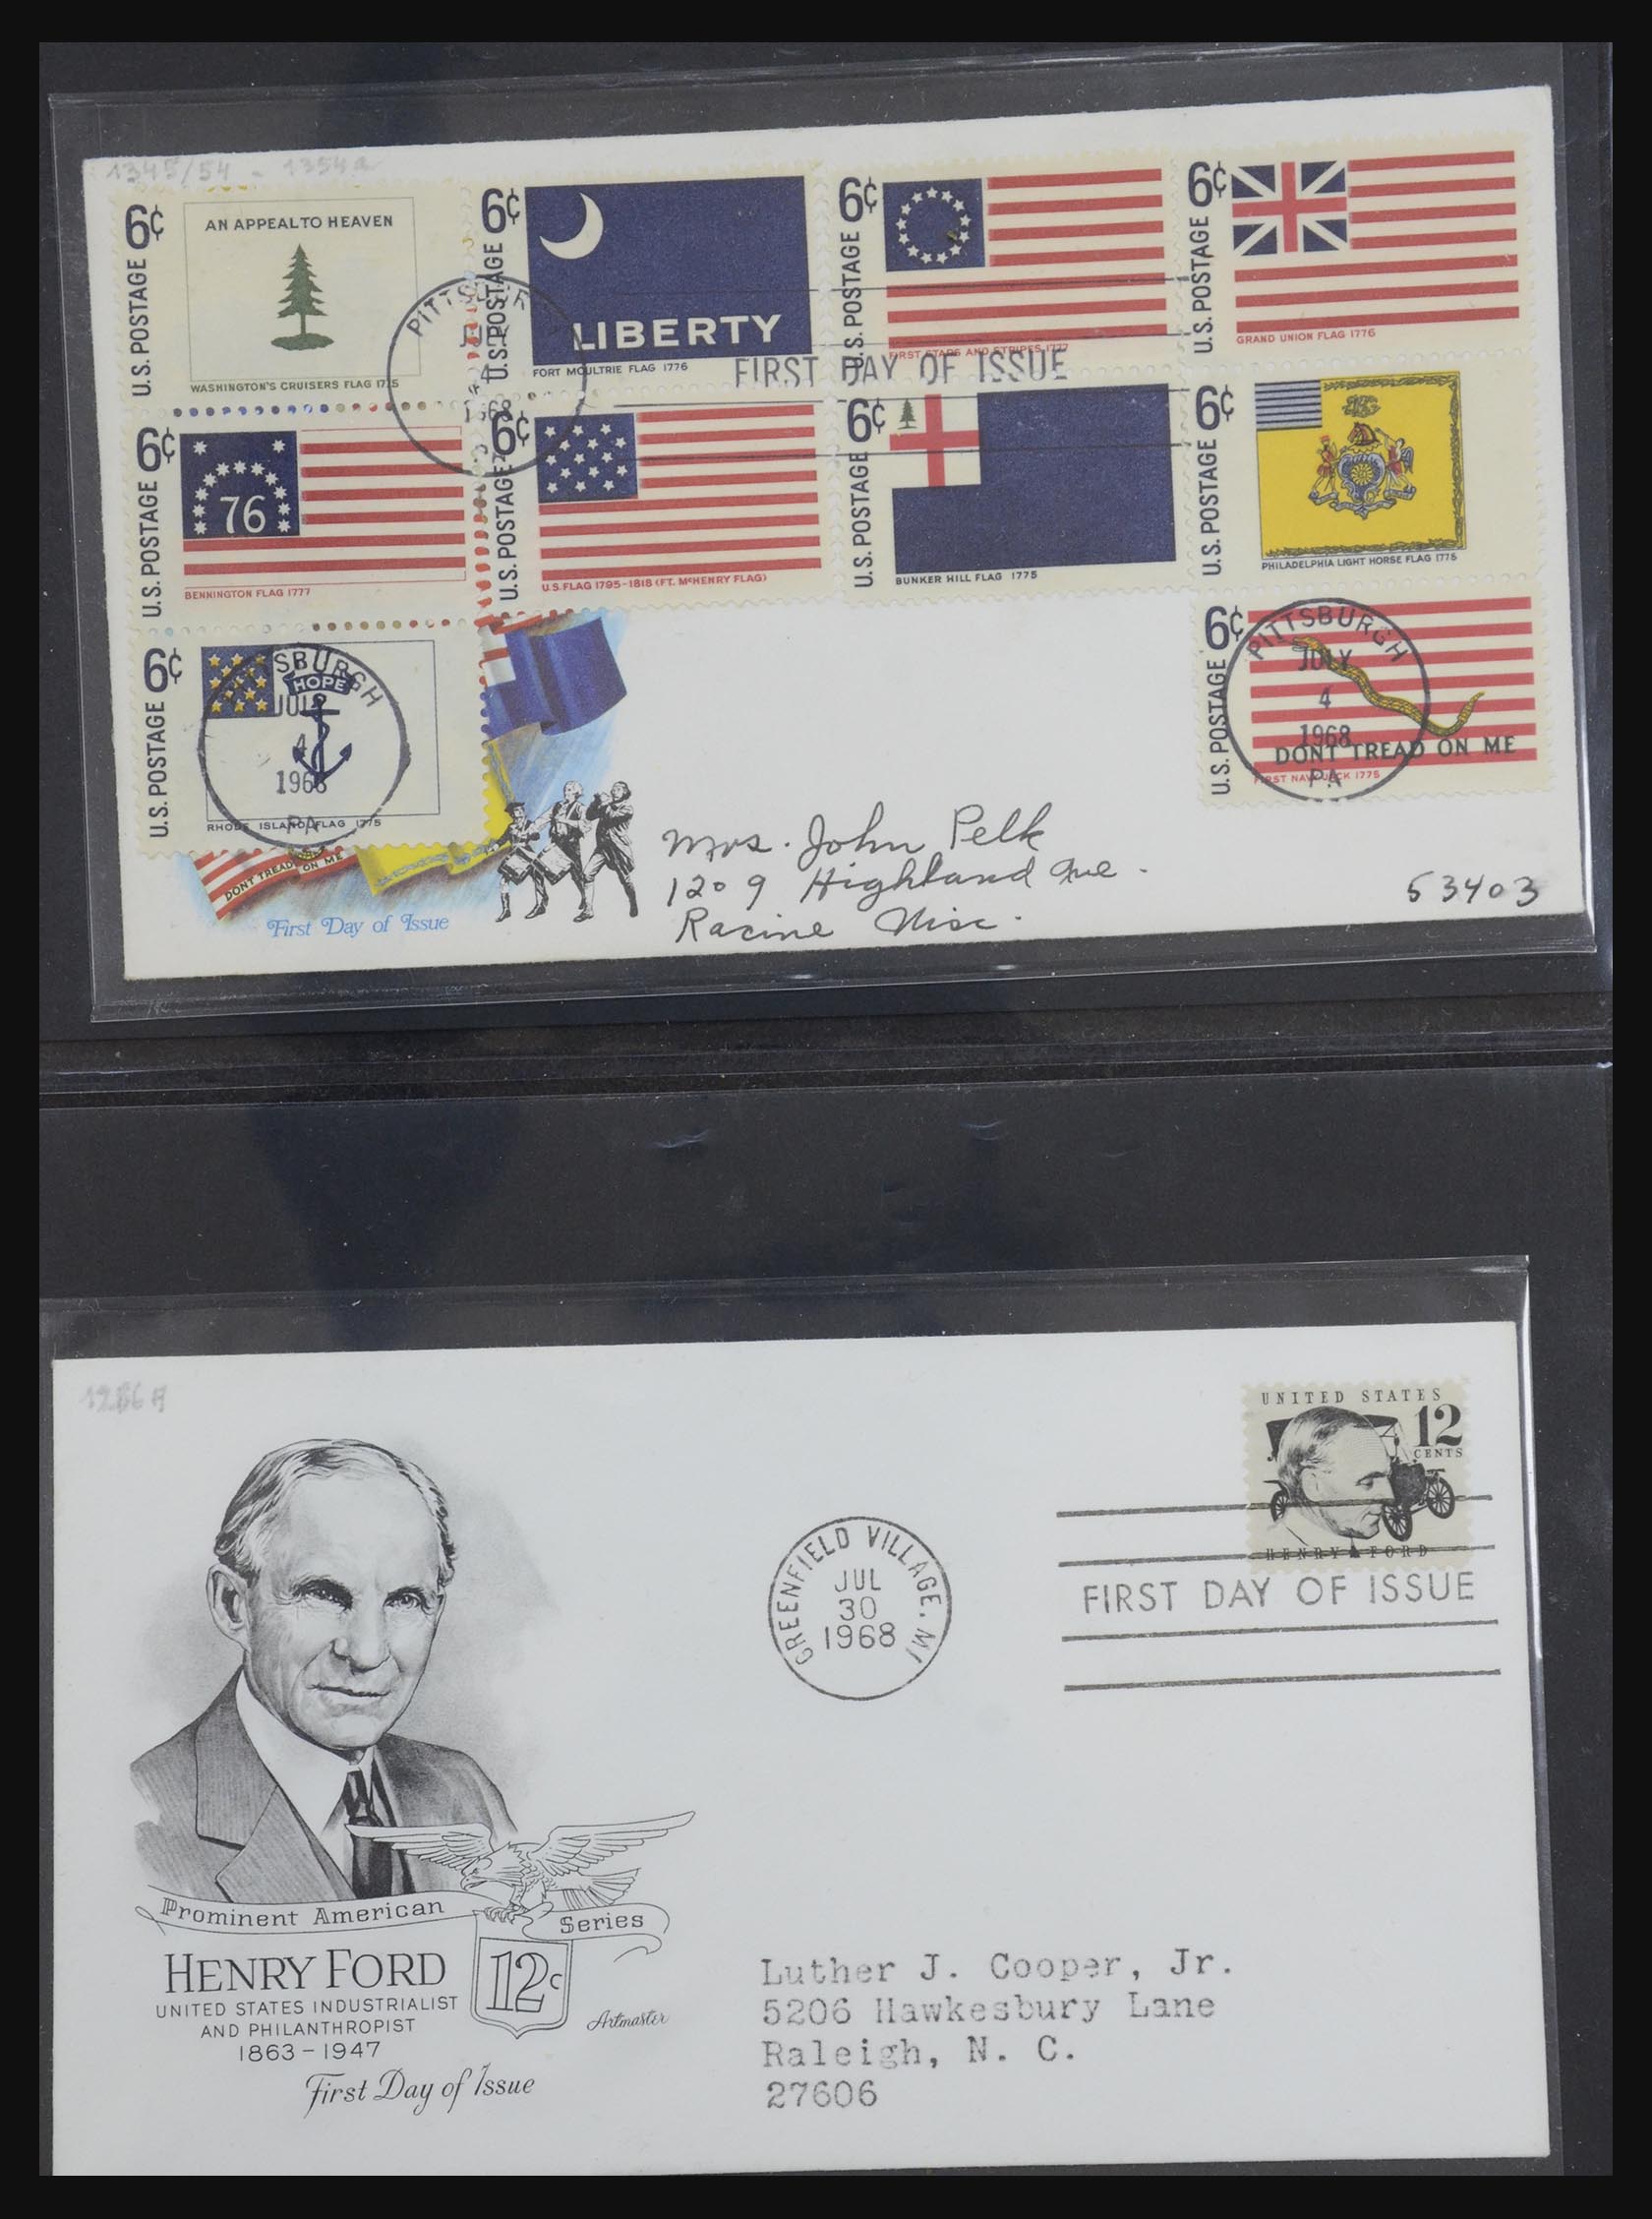 31913 0059 - 31913 USA first day cover collection 1945-1990.